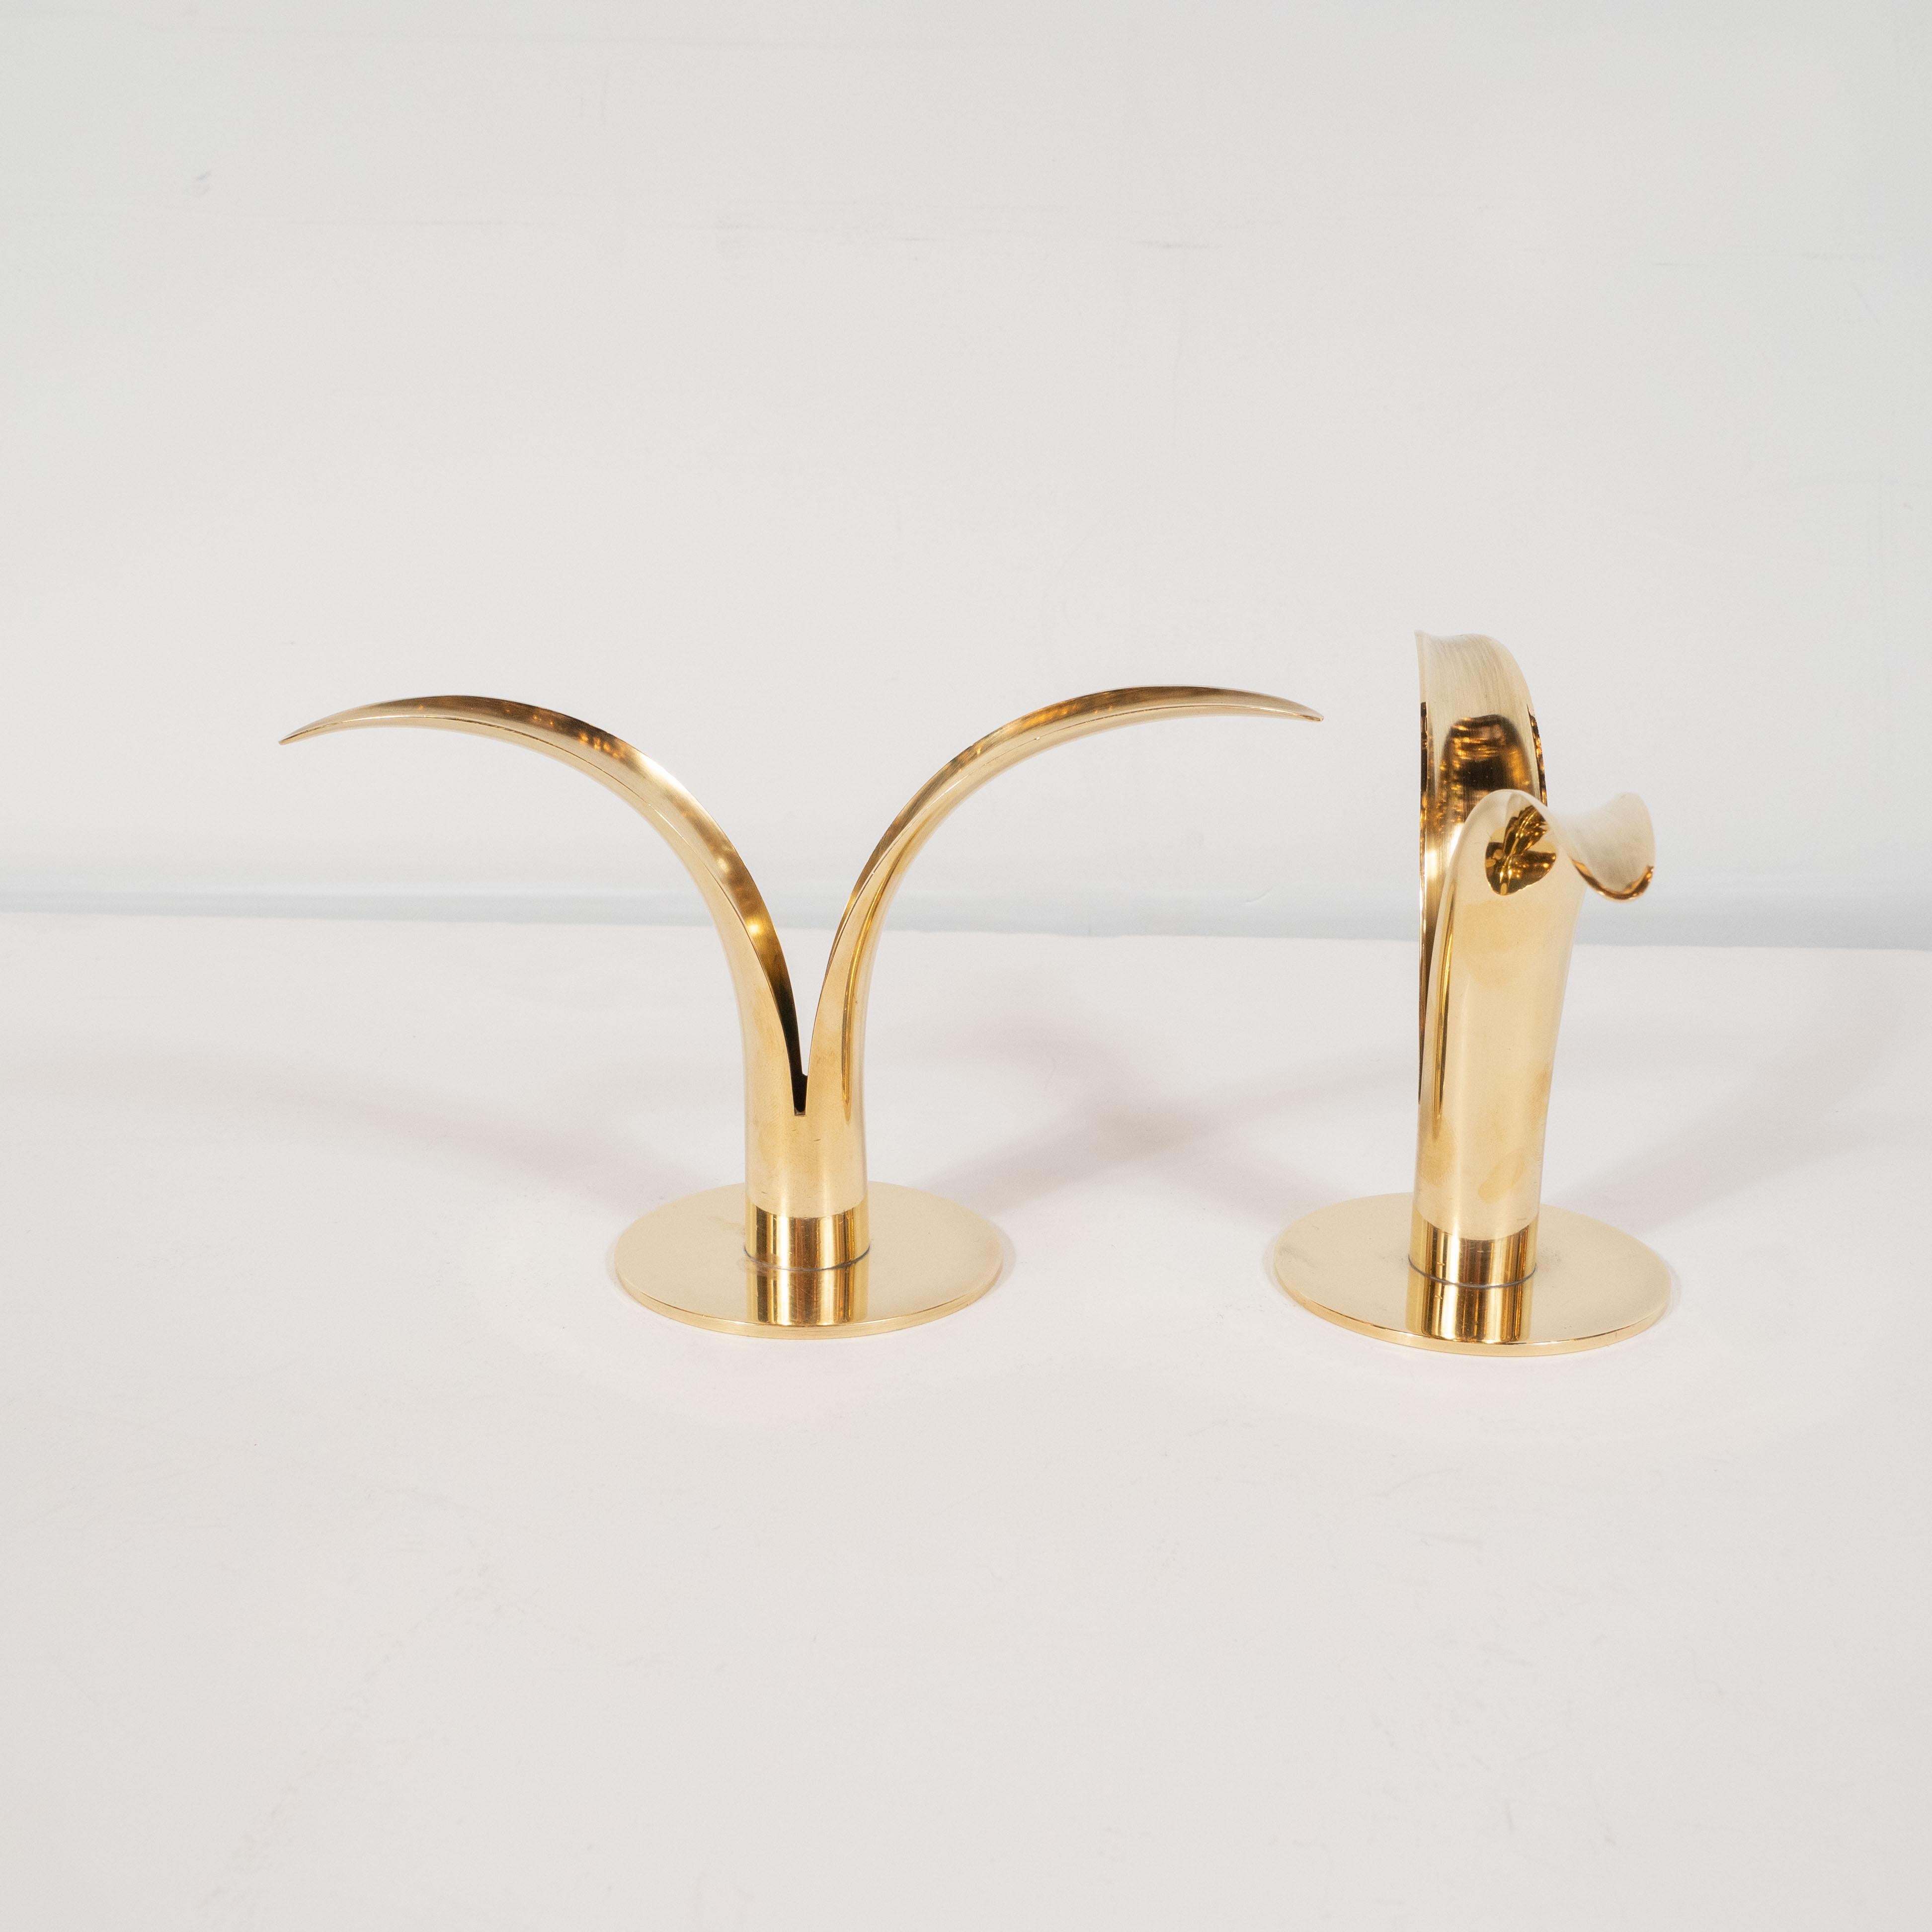 Mid-20th Century Pair of Mid-Century Modern Polished Brass Lily Candleholders by Konst of Sweden For Sale